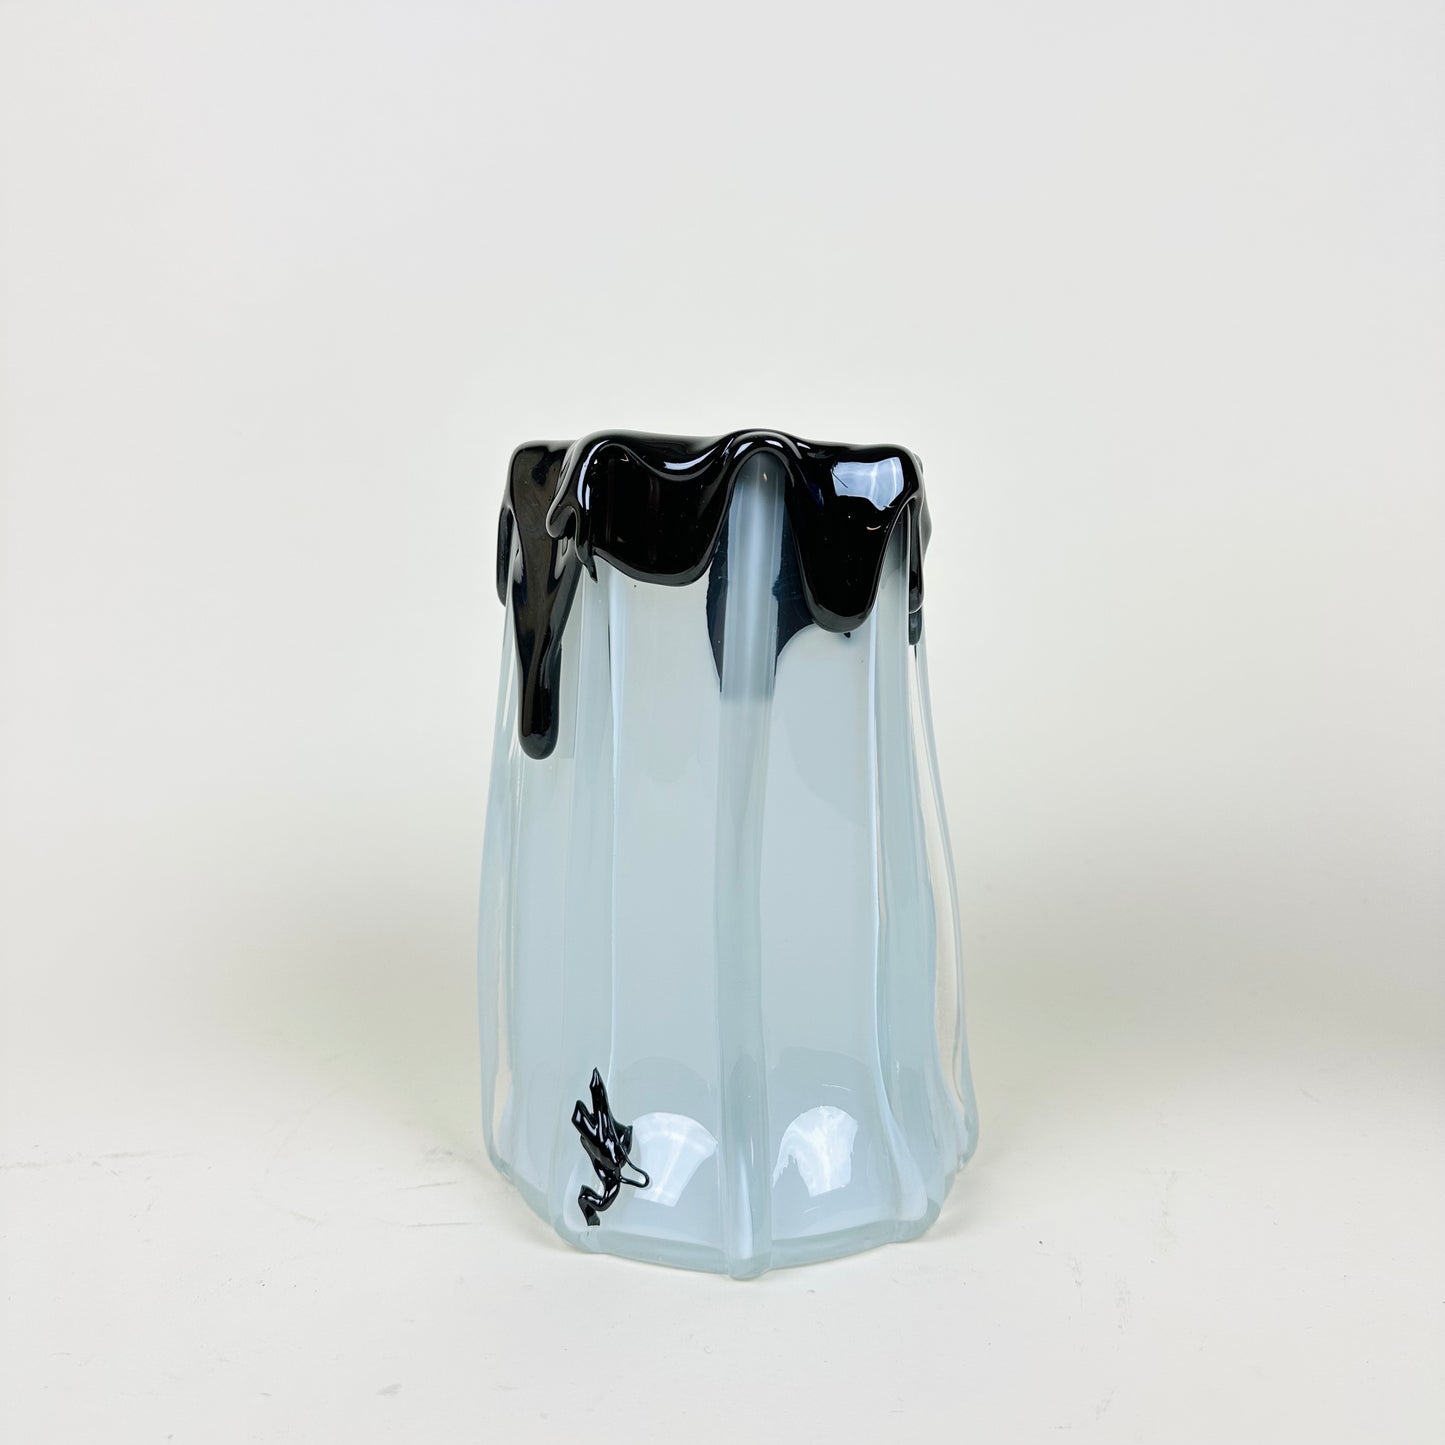 White and black glass vase by Silje Lindrup